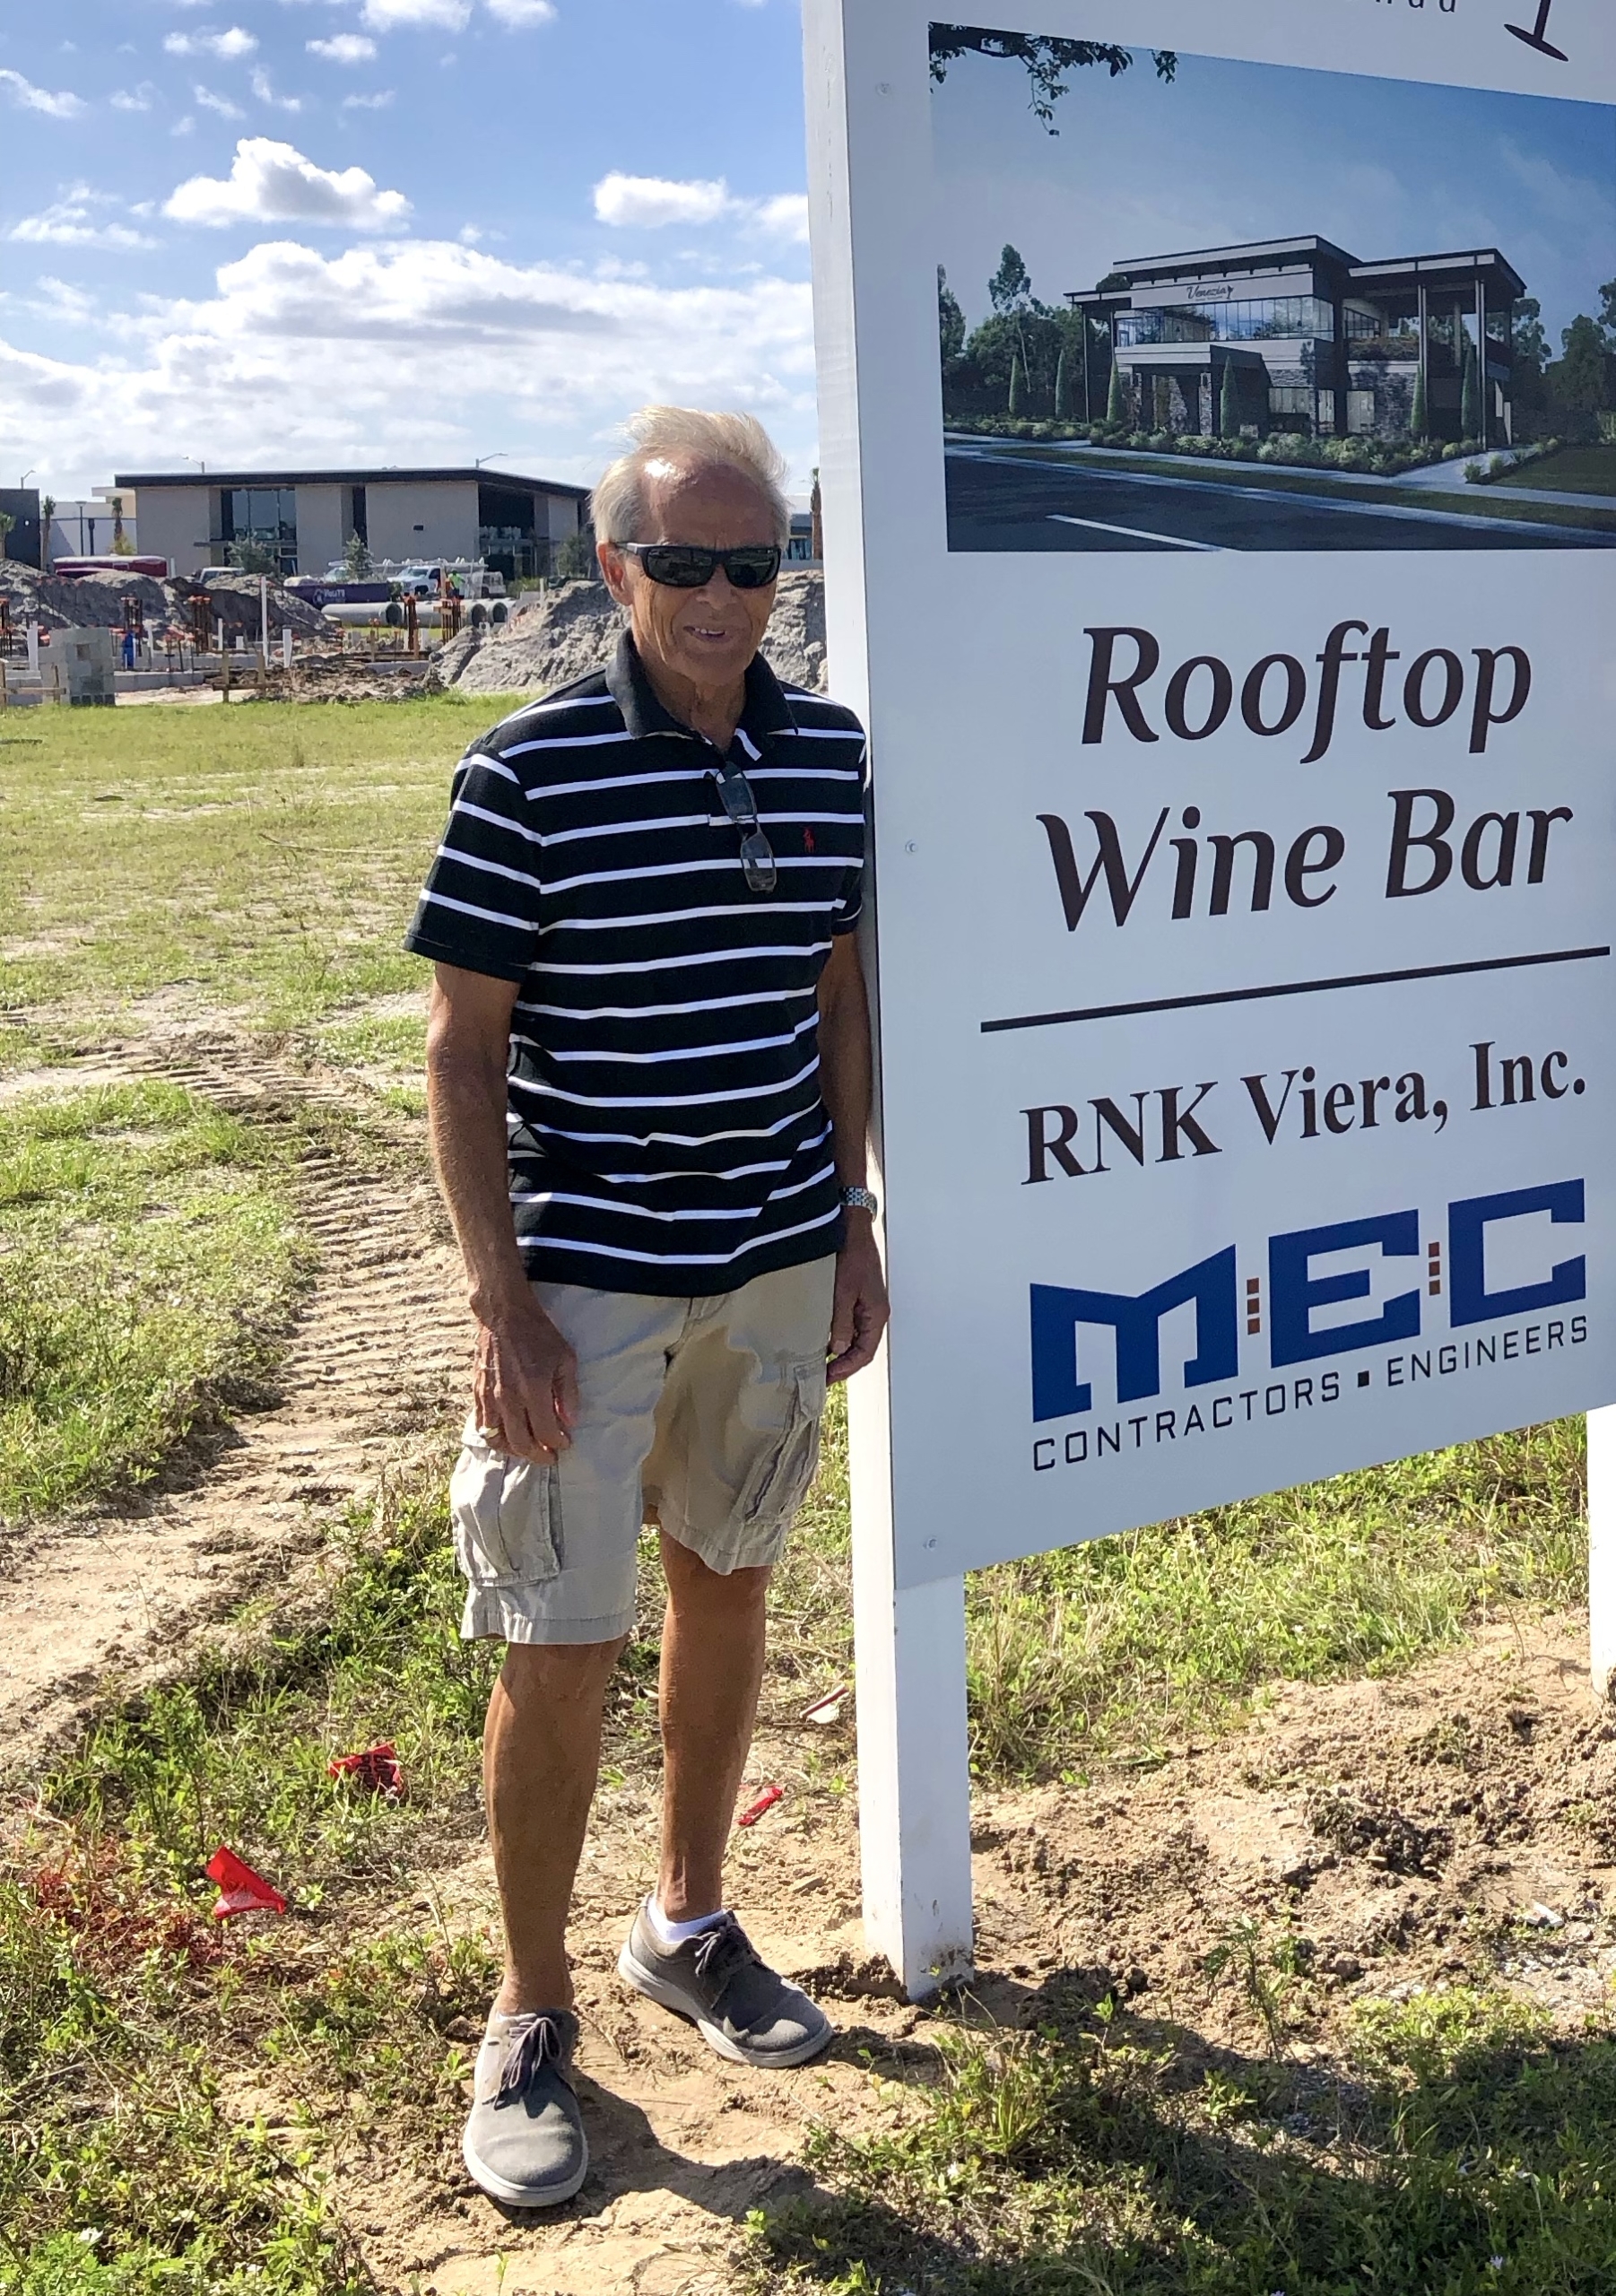 Viera Owner of rooftop wine bar next to sign